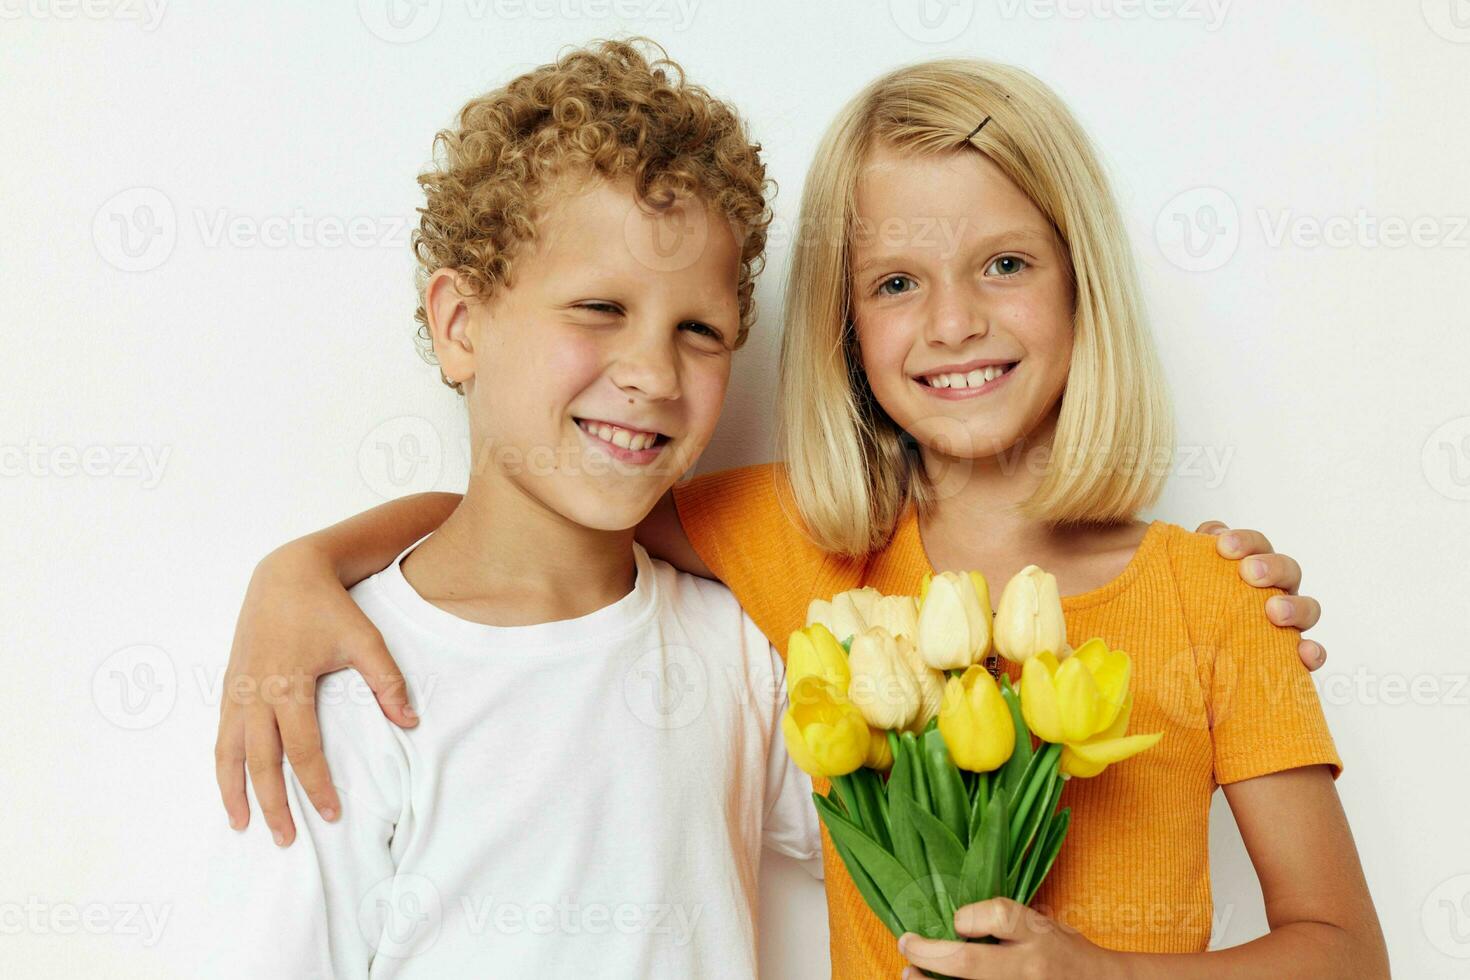 two joyful children fun birthday gift surprise bouquet of flowers isolated background unaltered photo